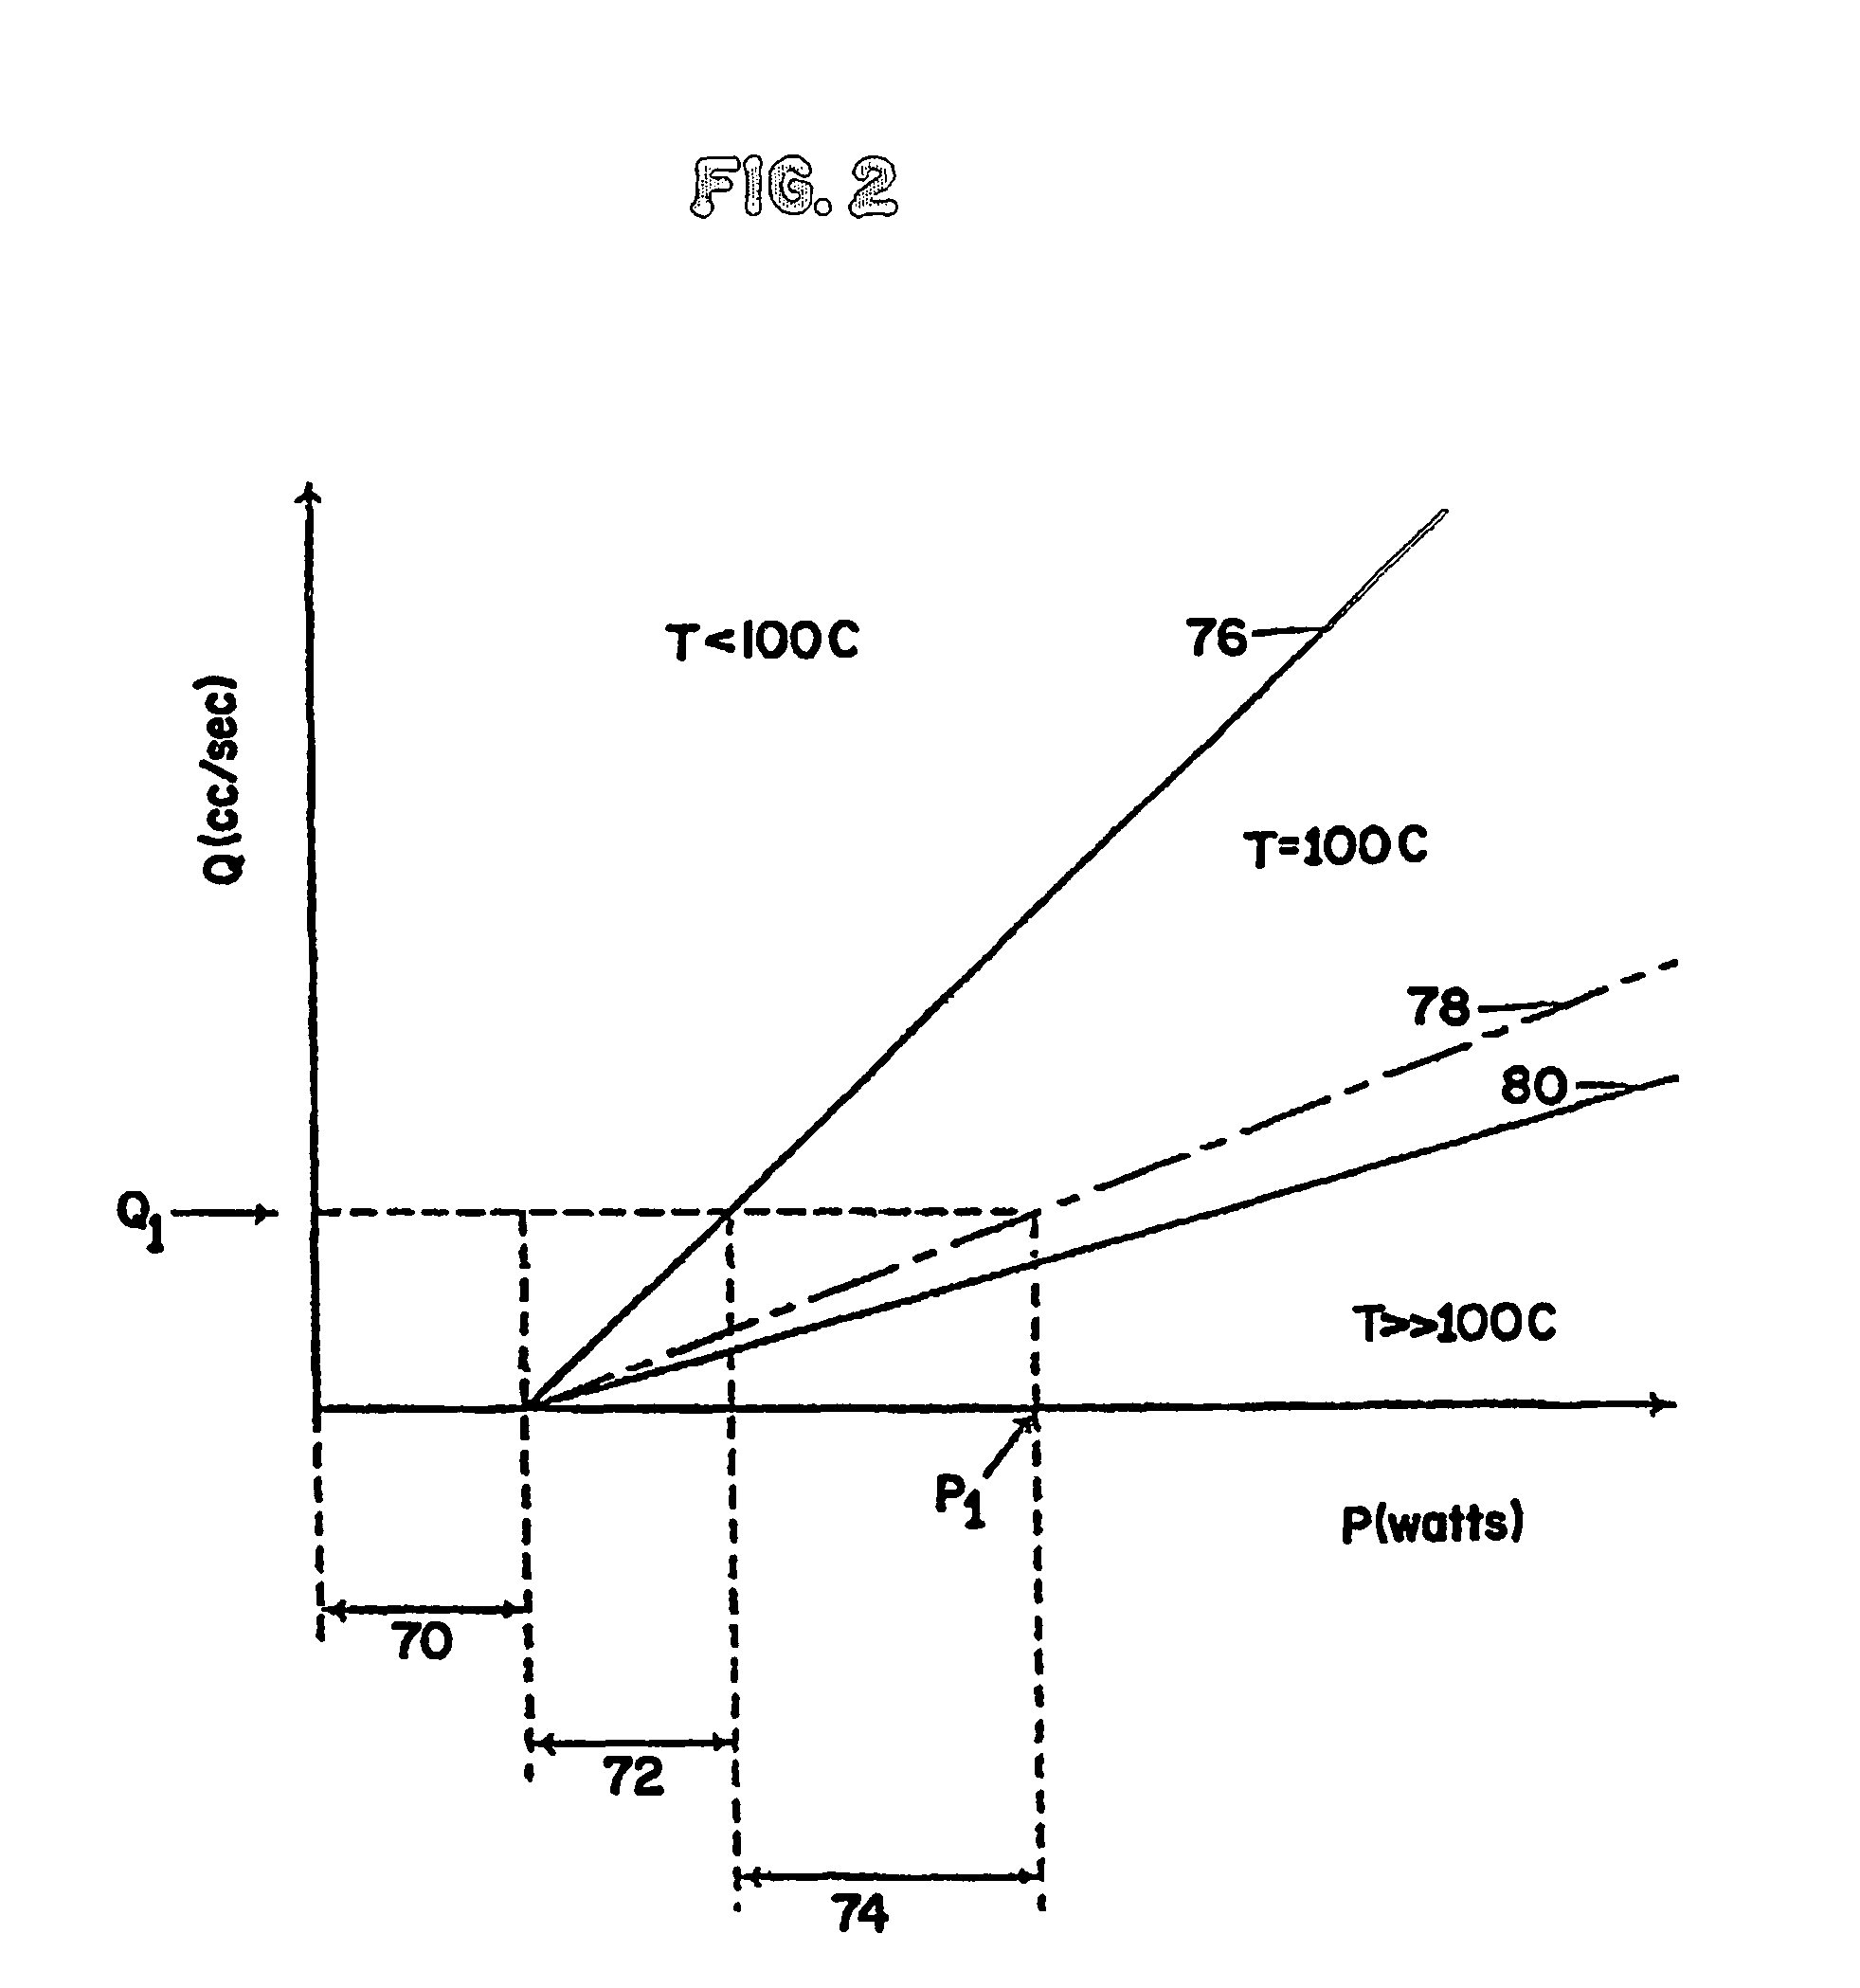 Electrosurgical generator and bipolar electrosurgical device adaptors